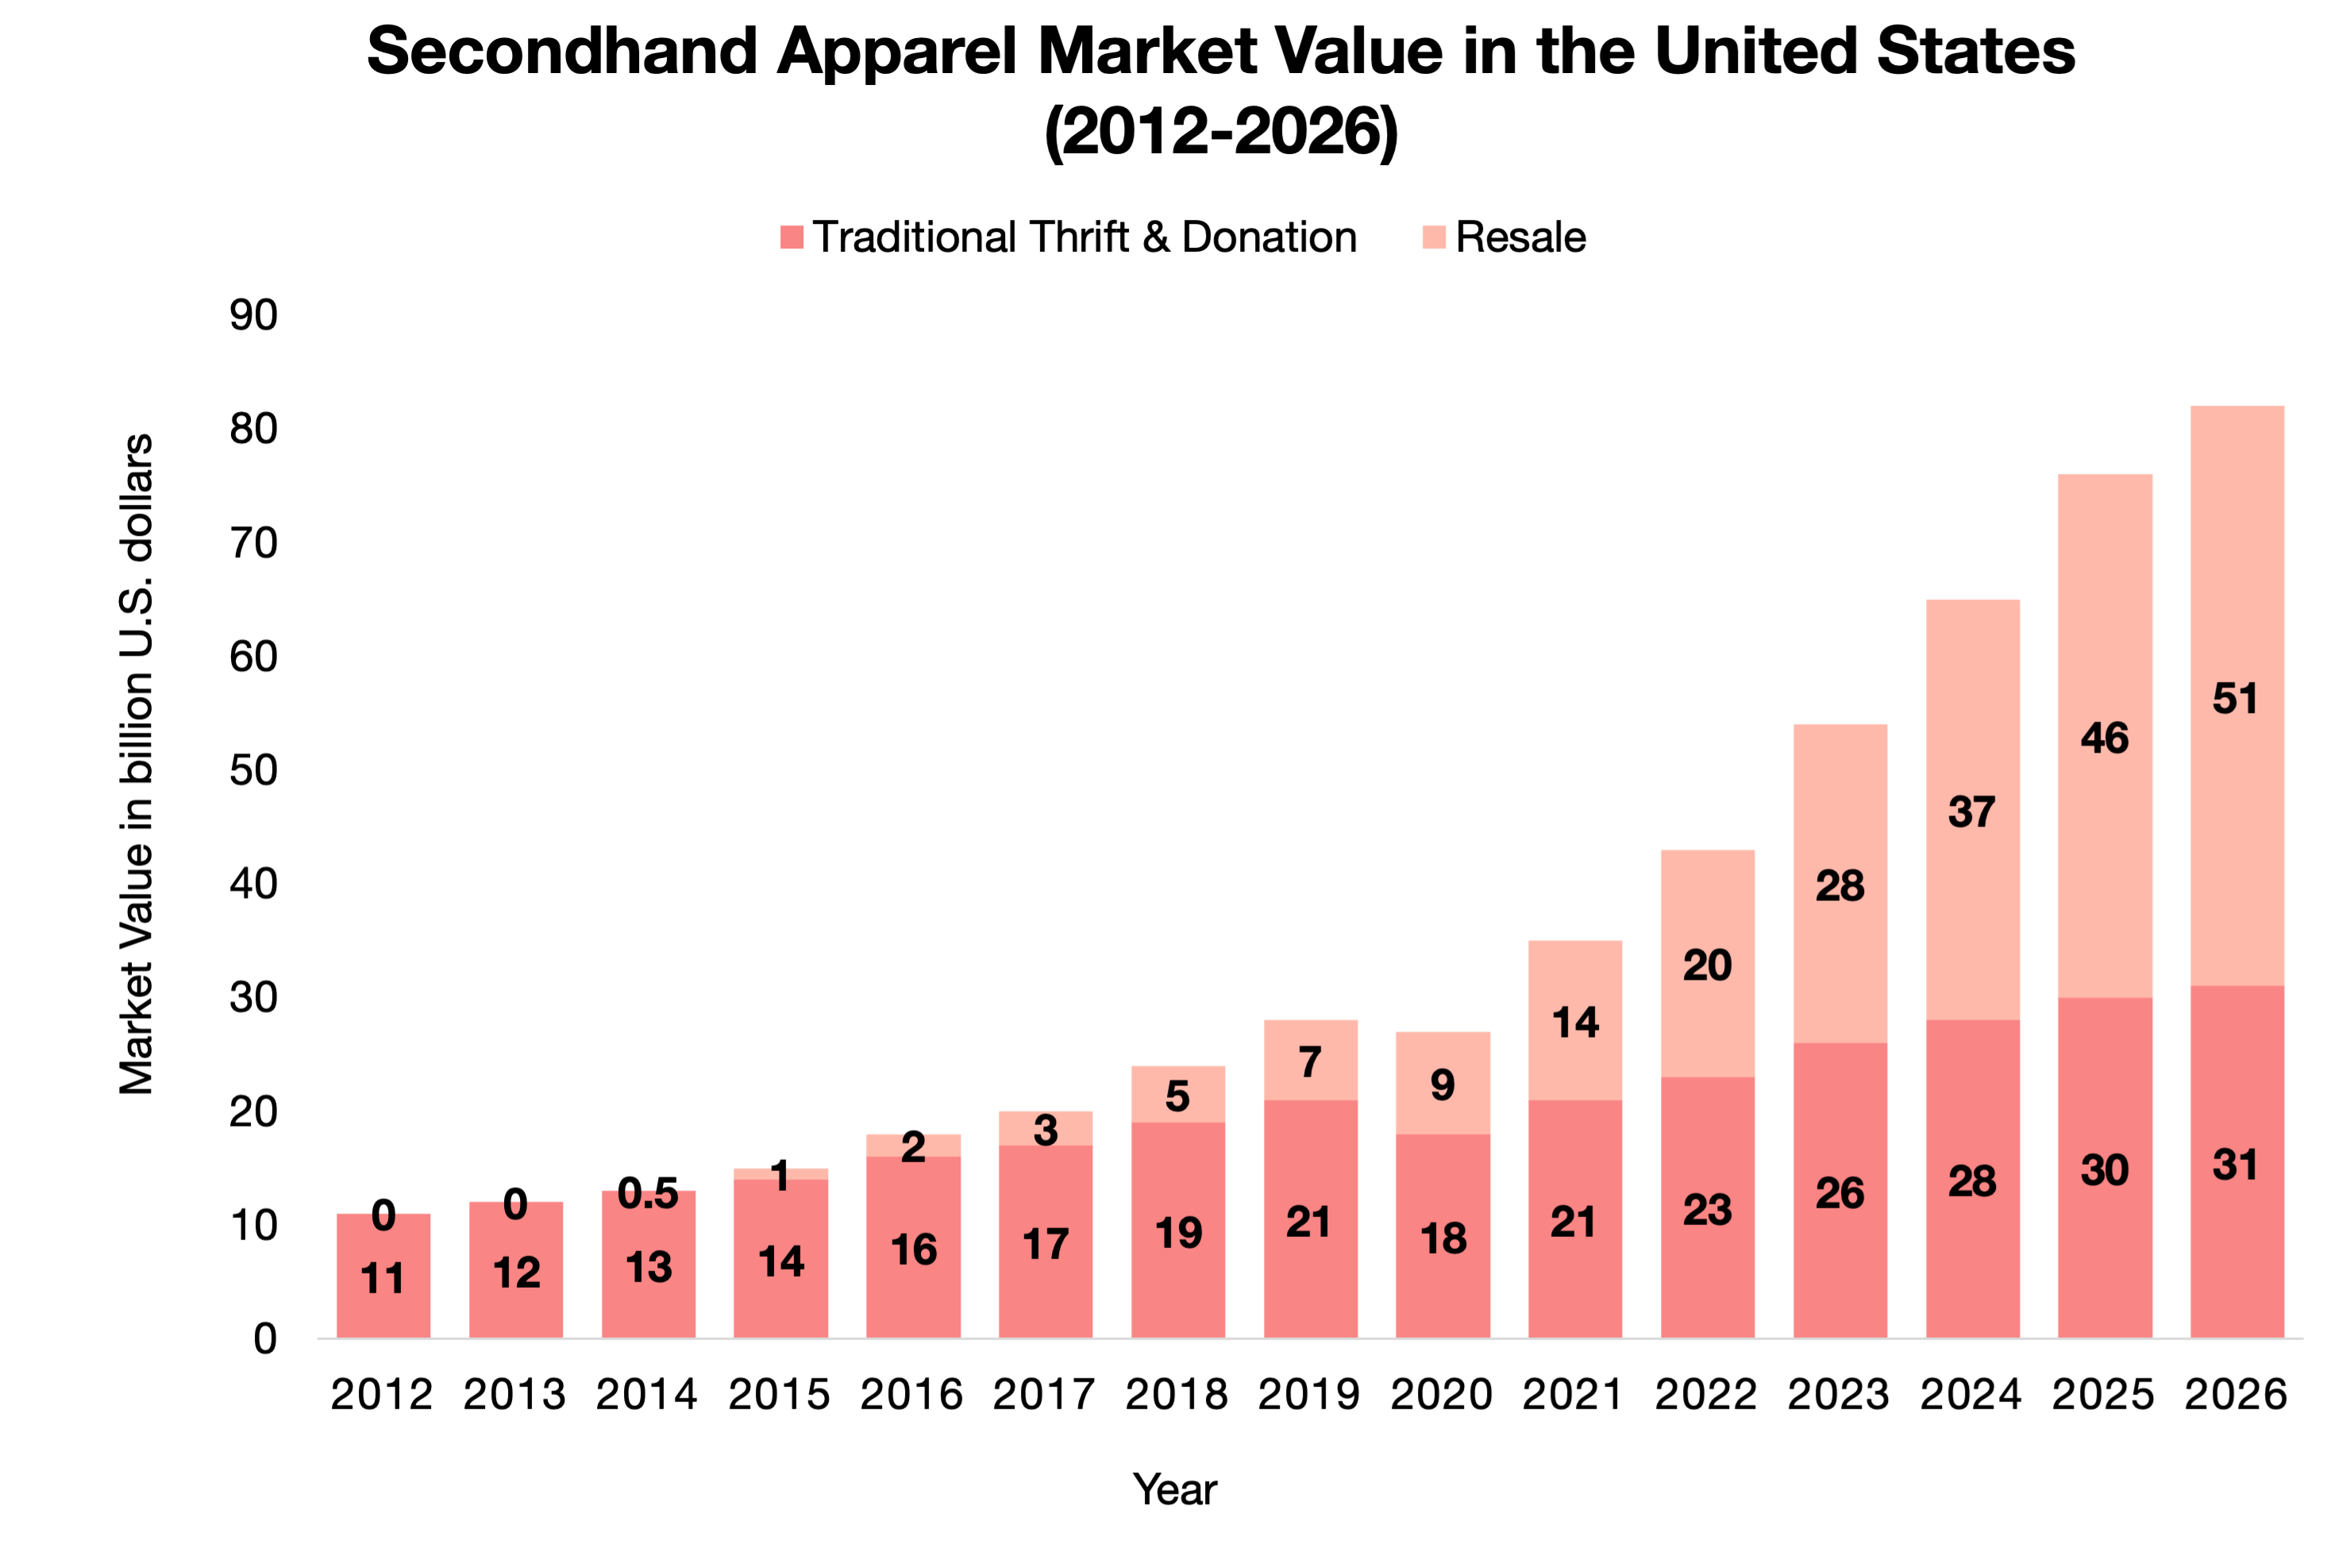 The Growing Potential Of The Resale Market, Fueled In Part By ThredUp